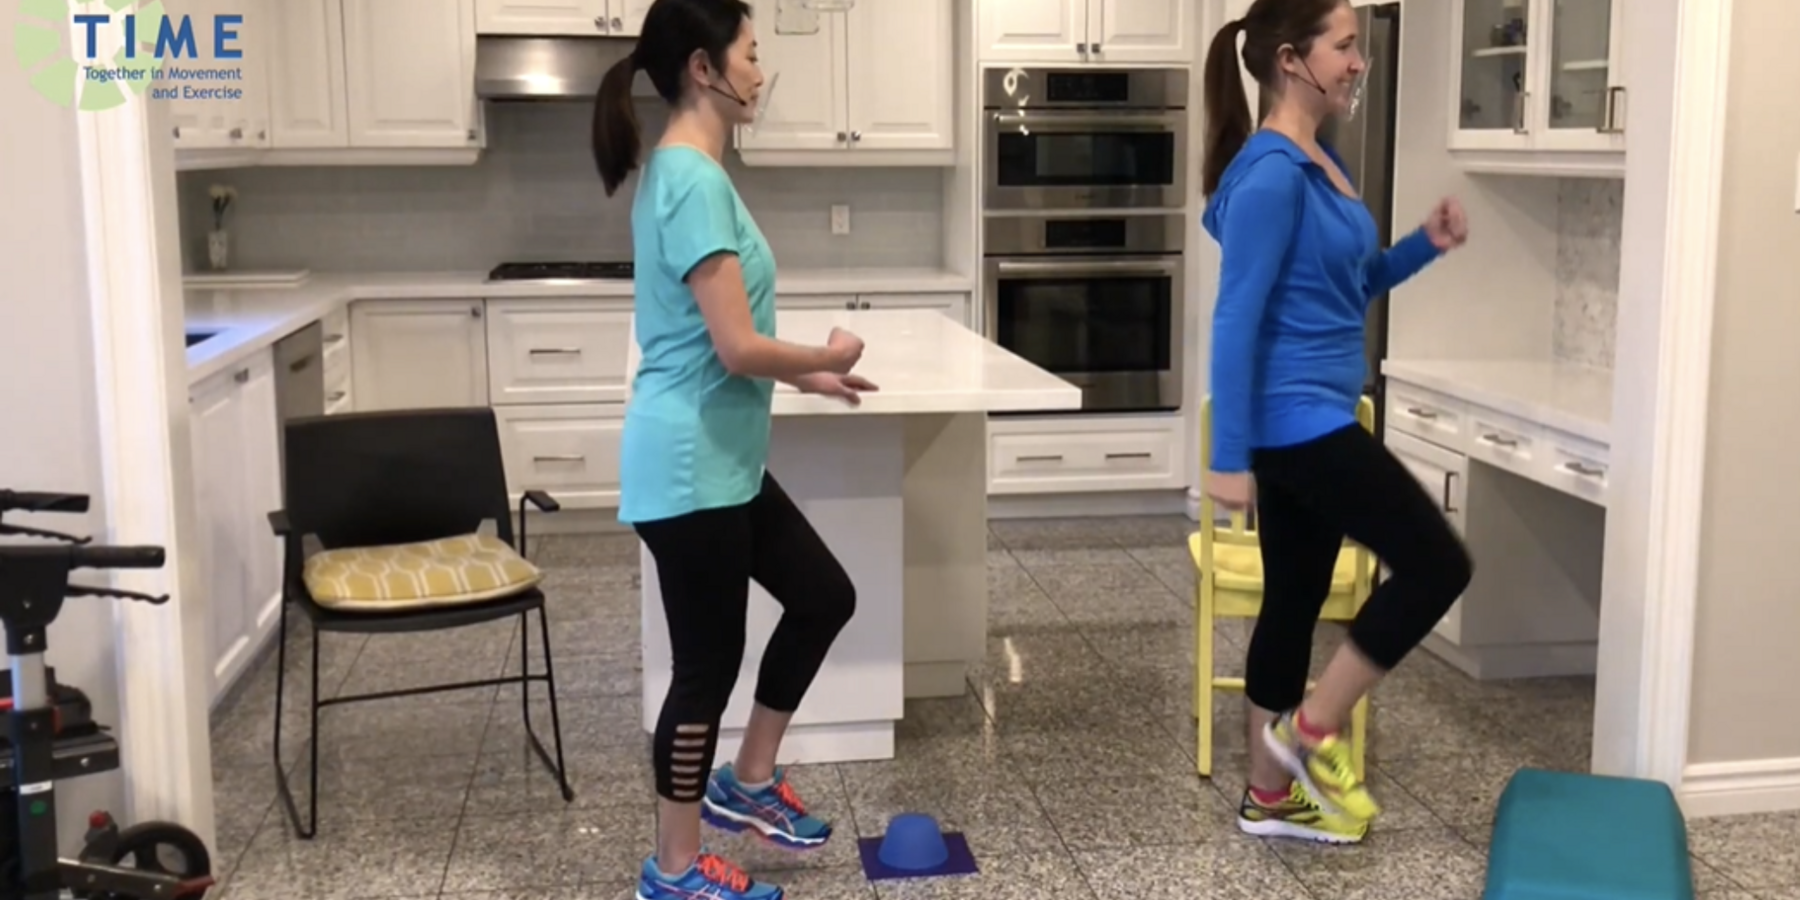 Two people doing exercise as part of the TIME programs